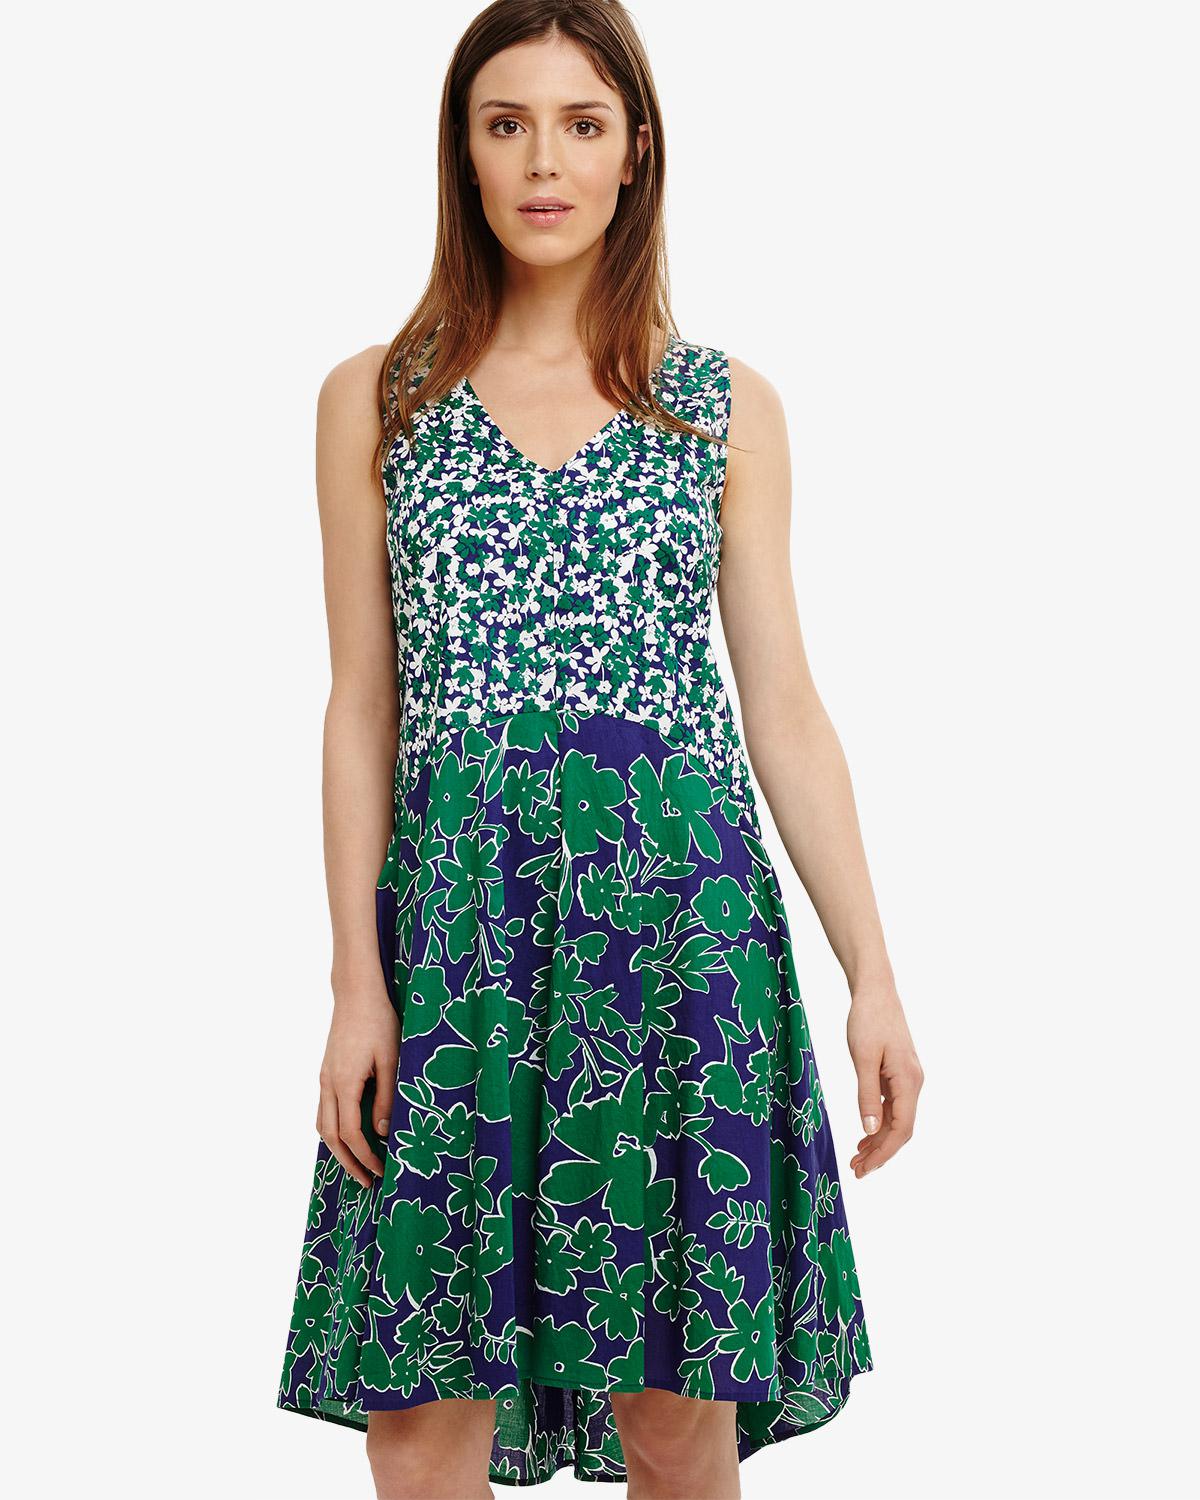 Lyst - Phase Eight Eloise Floral Dress in Green